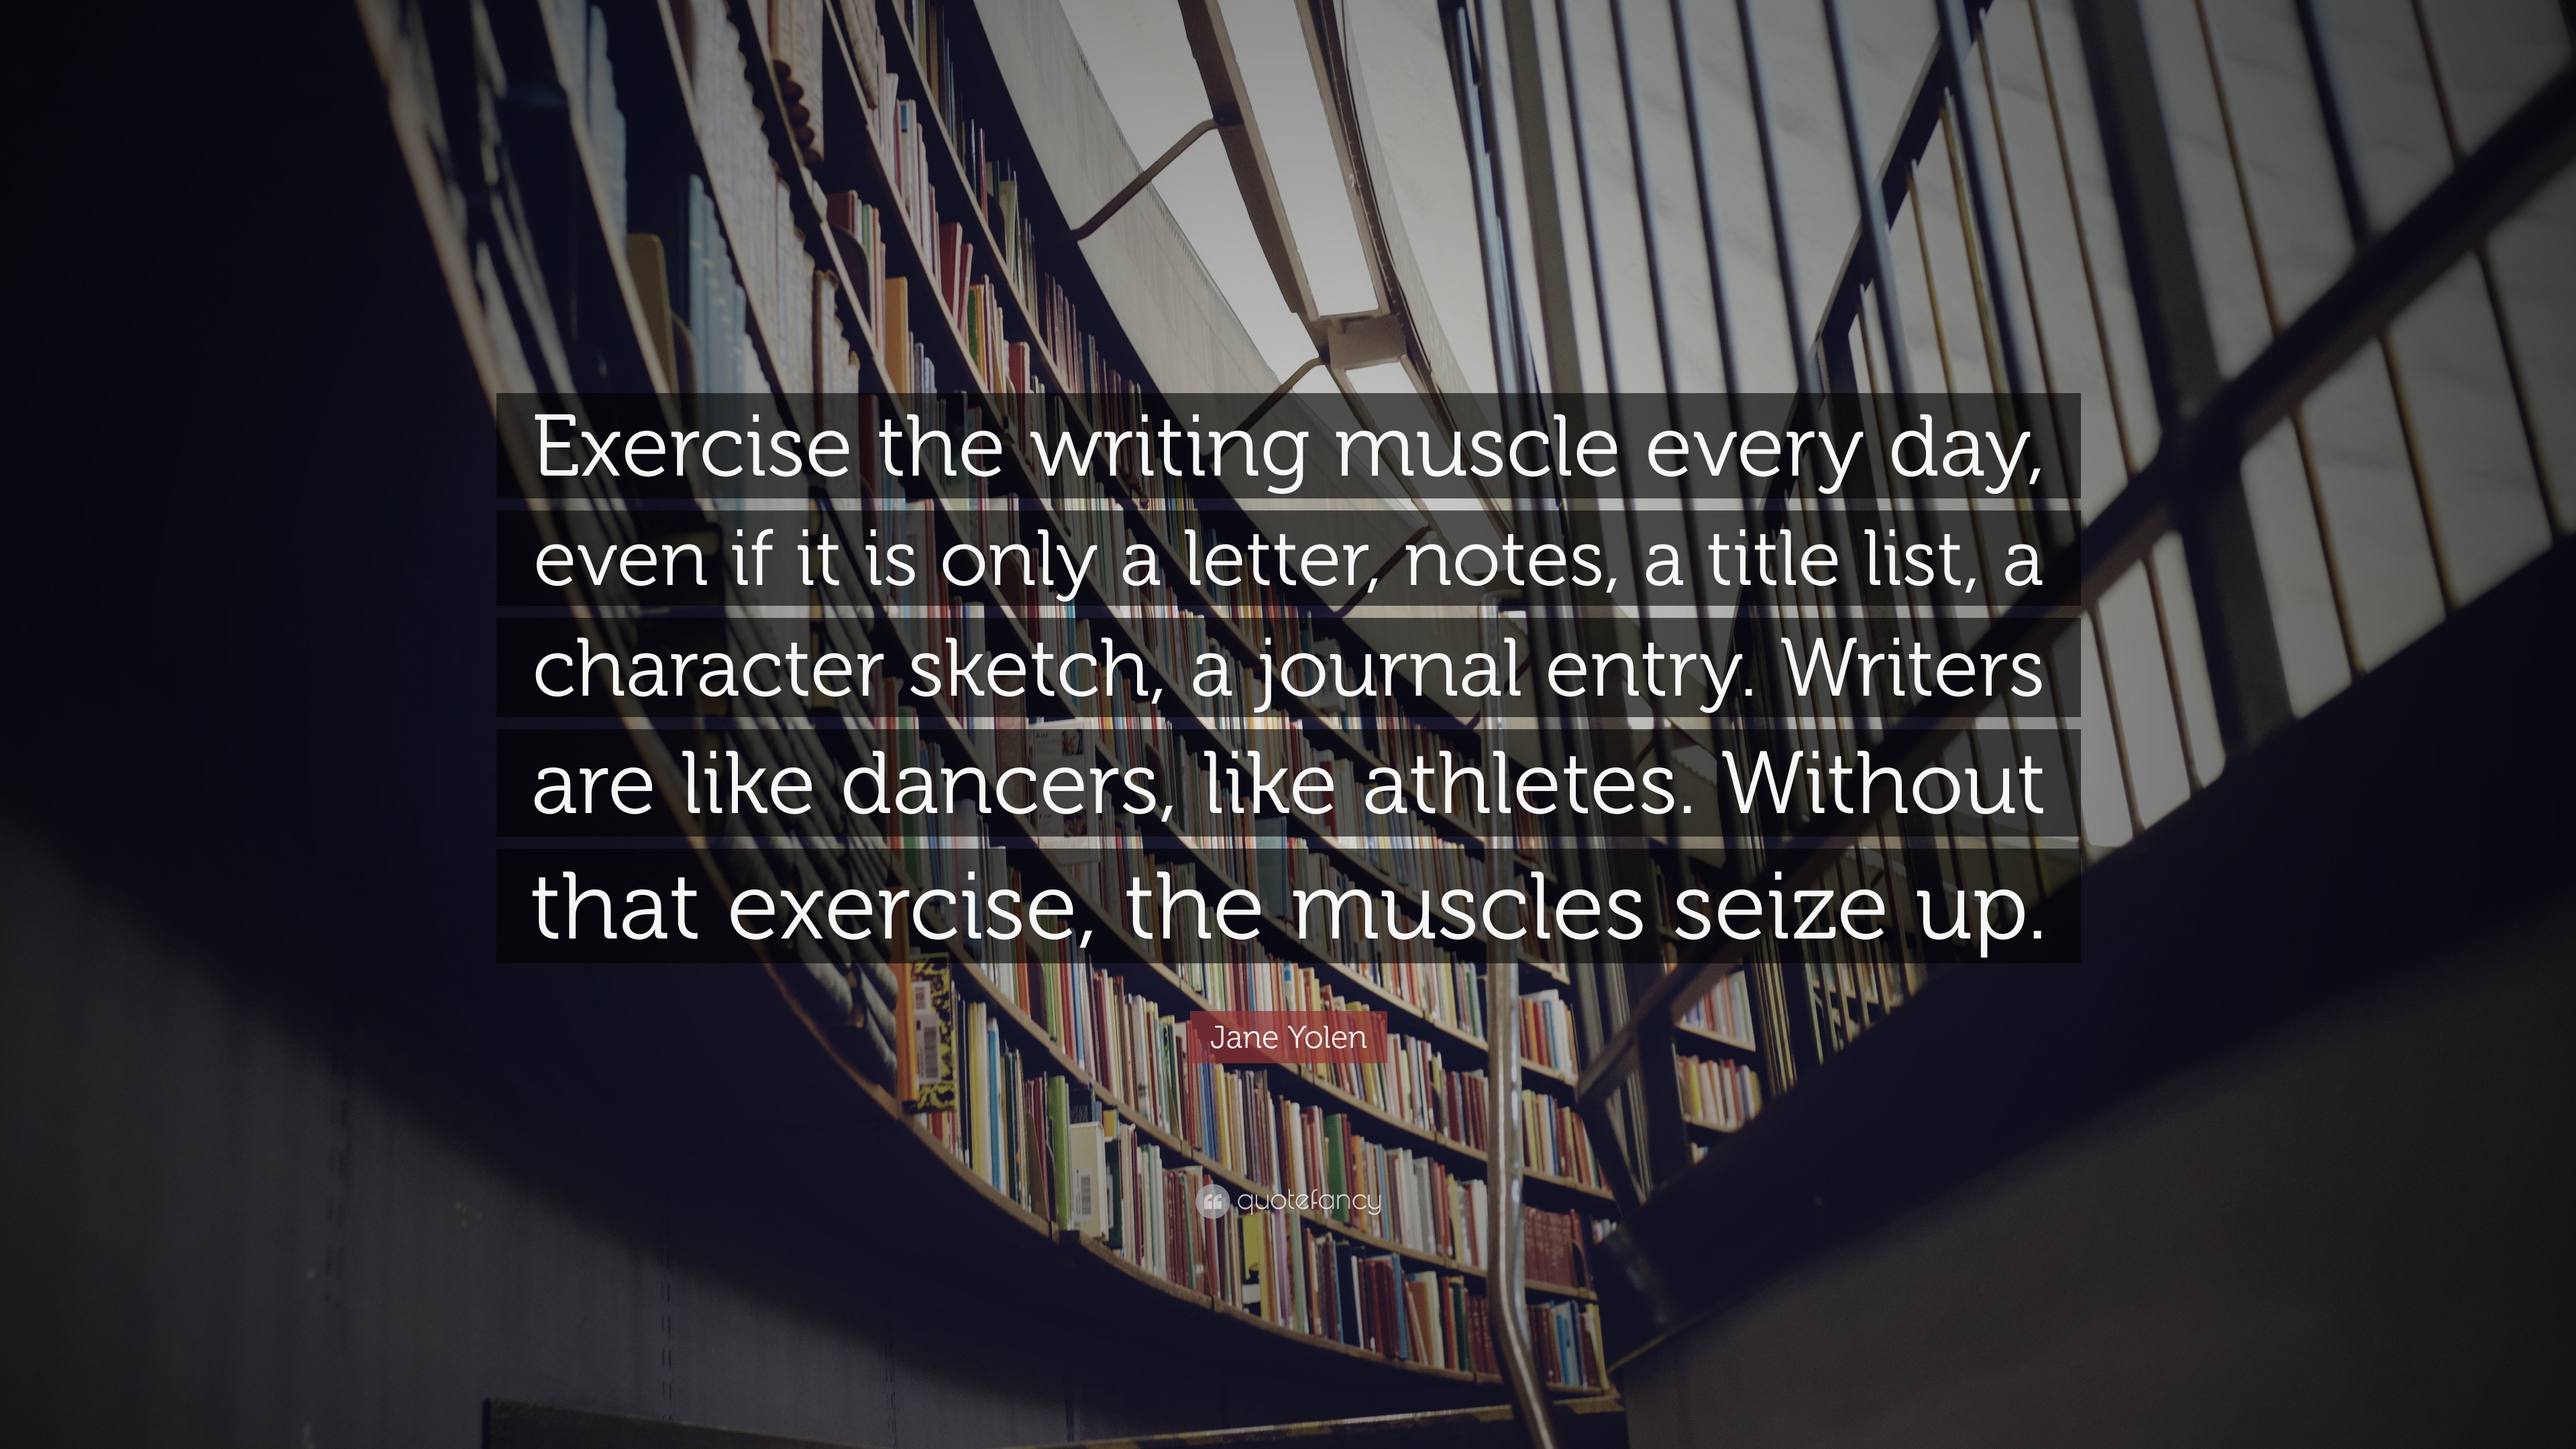 Jane Yolen quote Exercise the writing muscle every day even if it is